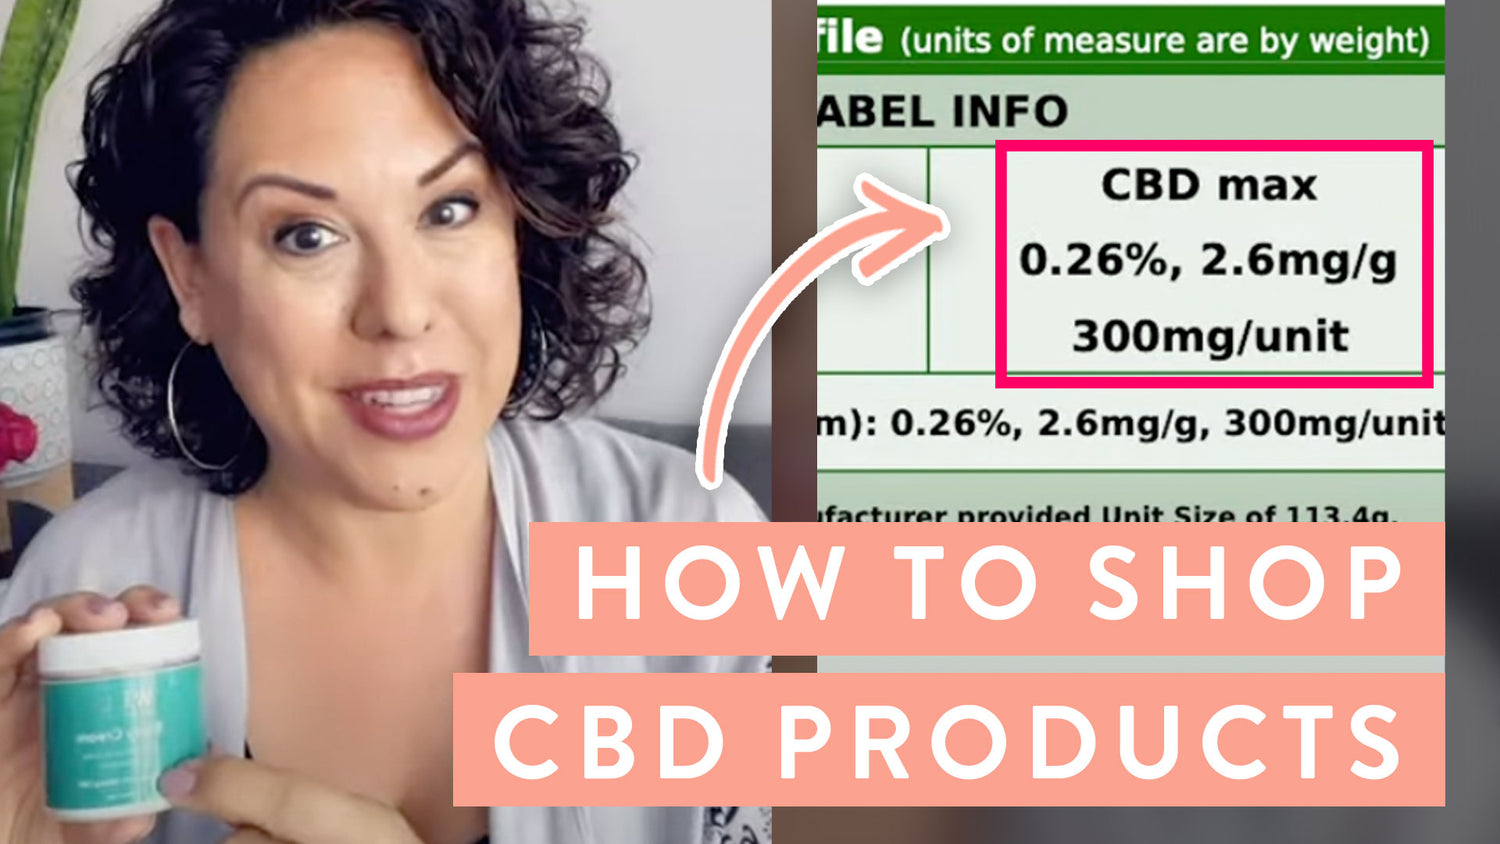 How to shop for CBD products